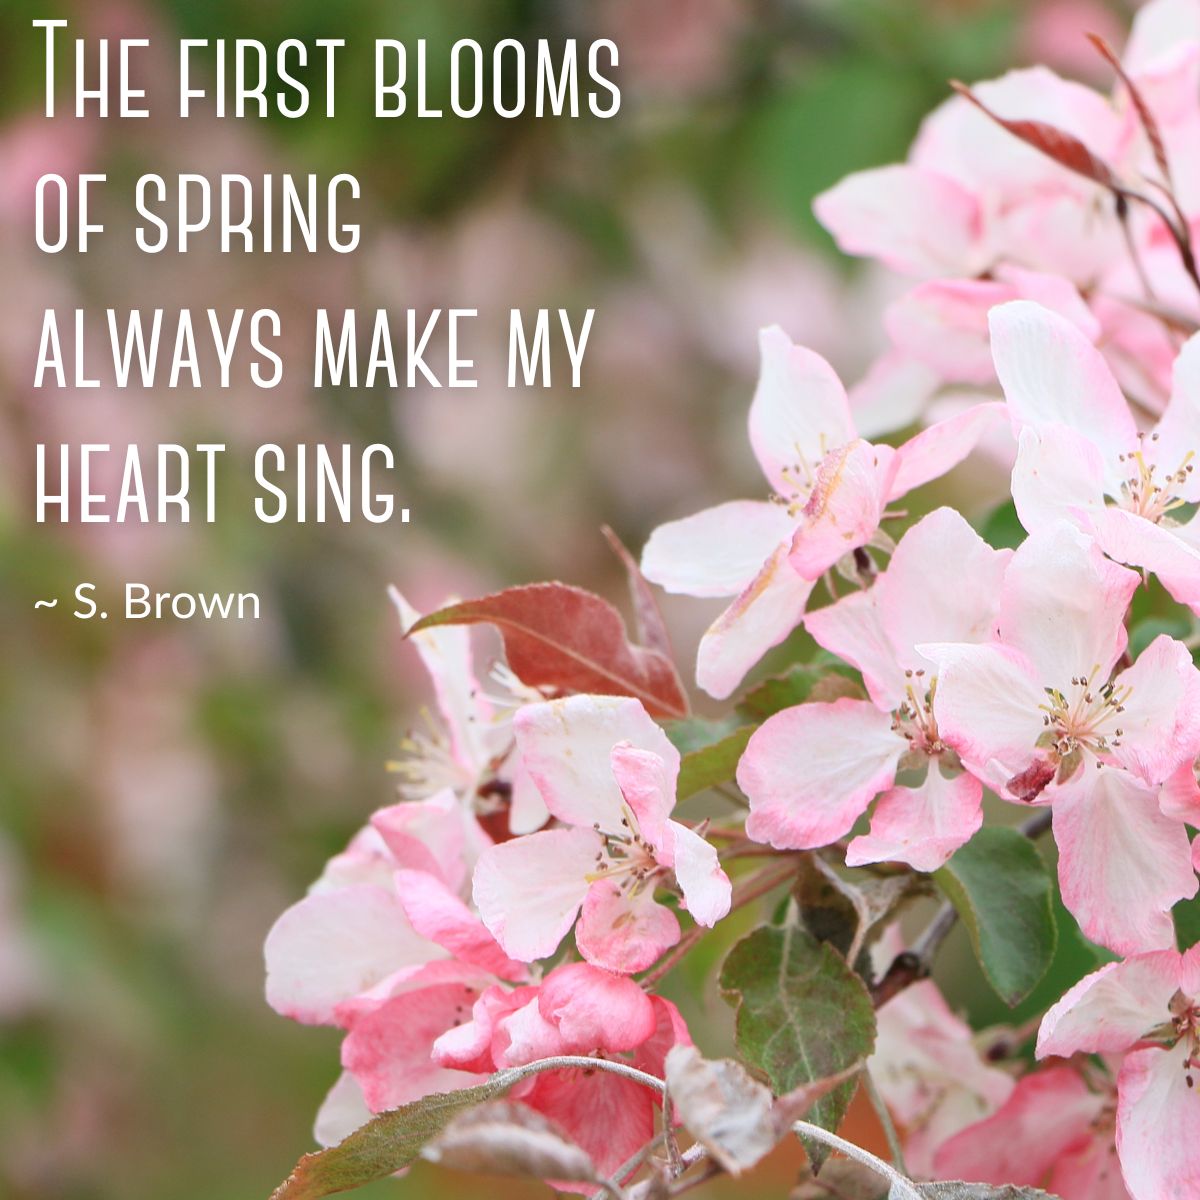 The first blooms of spring always make my heart sing. ~S. Brown